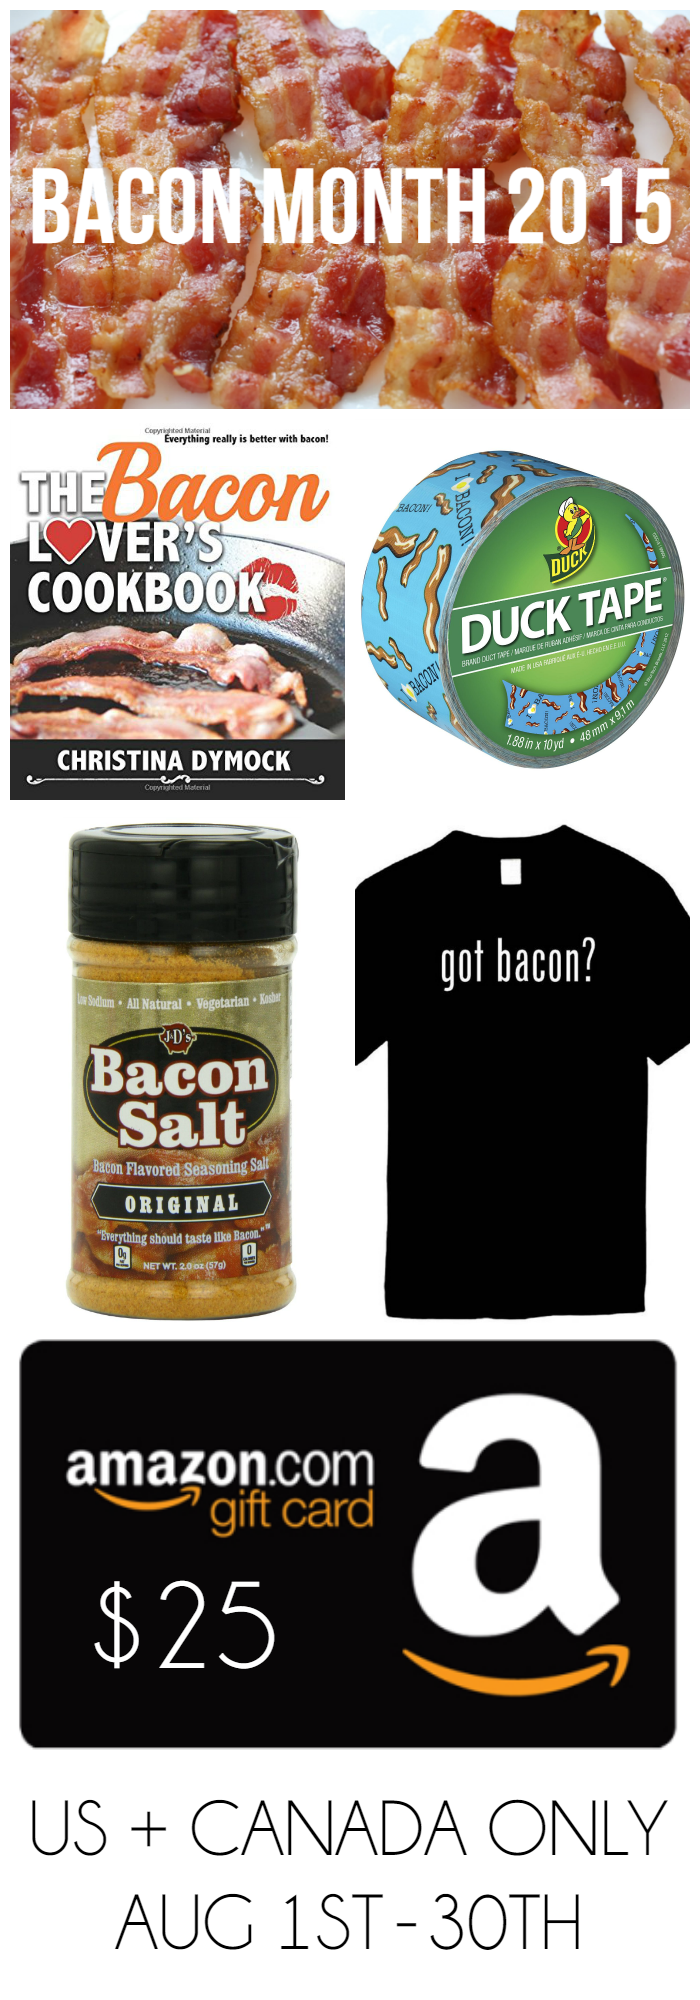 Bacon Month 2015 Prize Pack from Bread Booze Bacon + Friends! Prizes included The Bacon Lover's Cookbook, bacon and eggs Duct Tape, bacon salt, "got bacon?" t-shirt, and $25 Amazon.com gift card. Open now through Aug 30th.